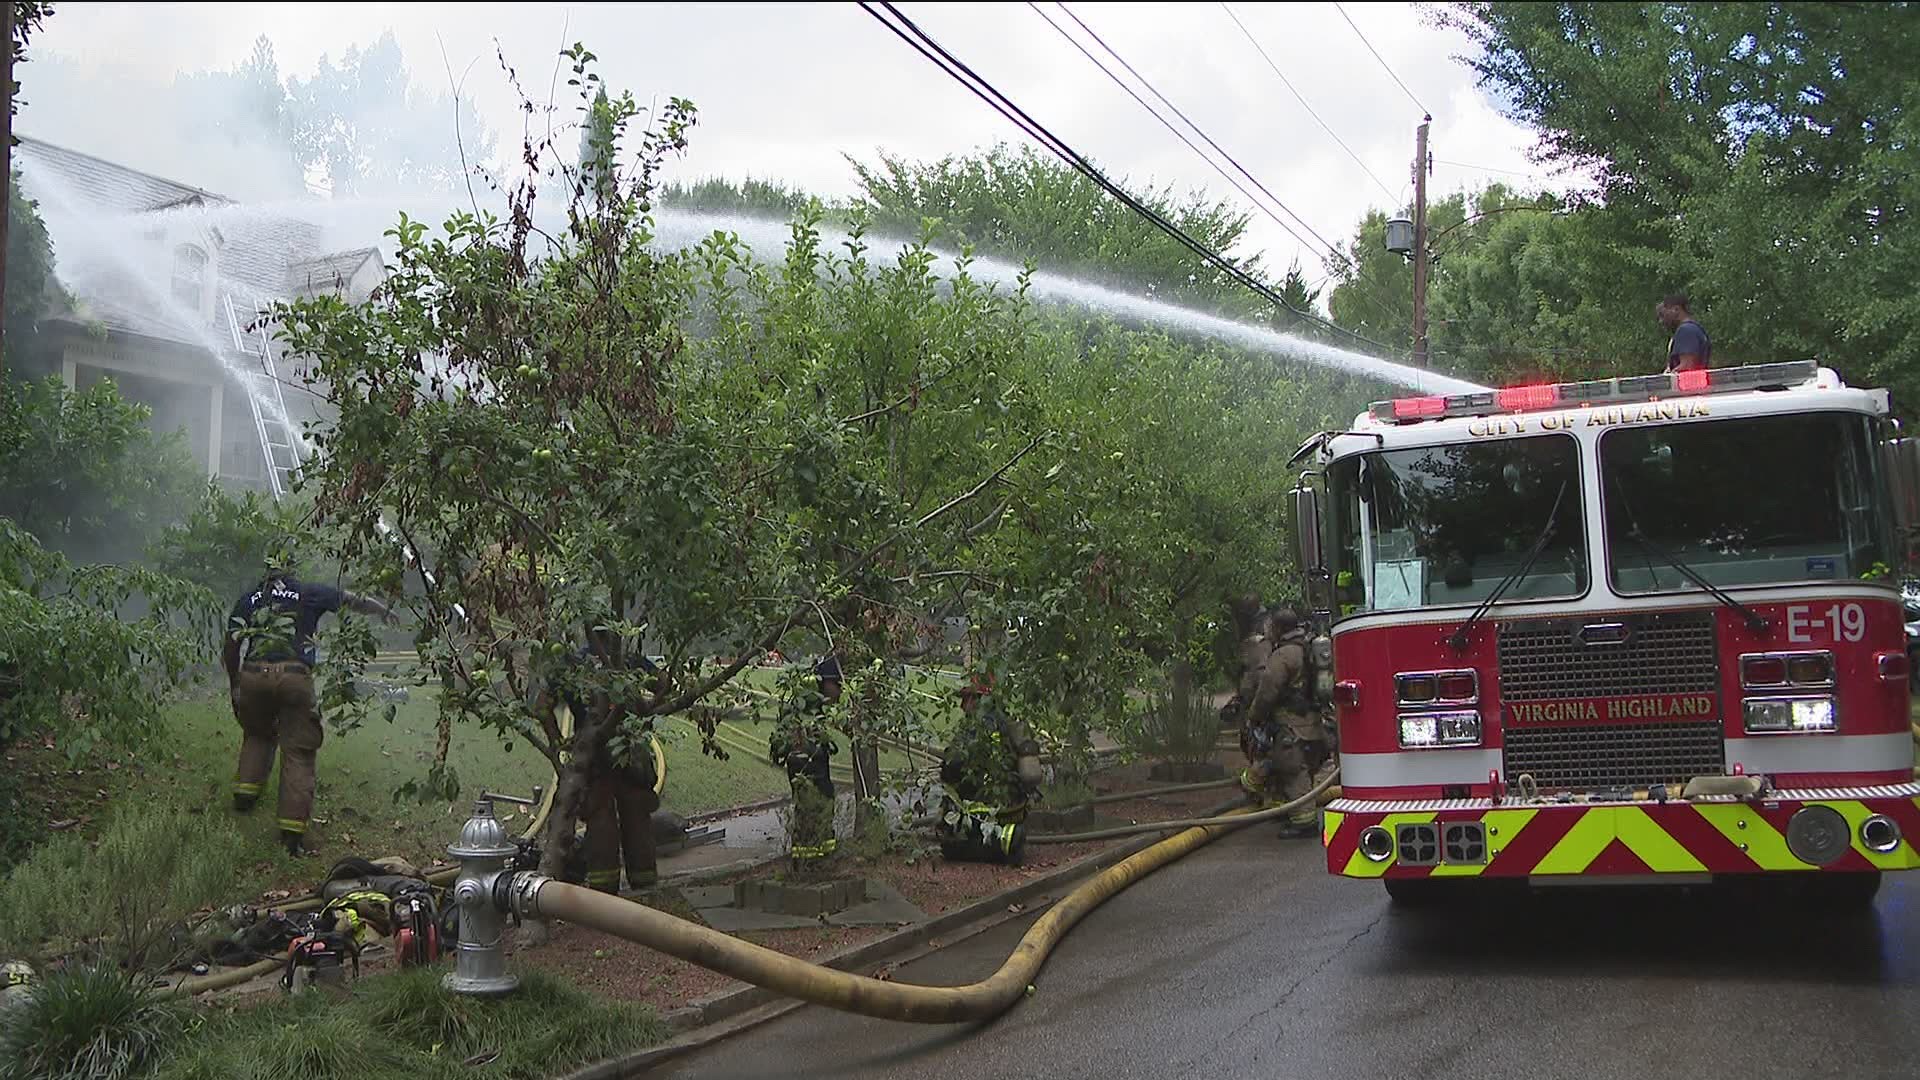 Firefighters were seen dousing the flames coming from a large two-story home off Lanier Boulevard in the Morningside-Lenox Park neighborhood near Virginia-Highland.